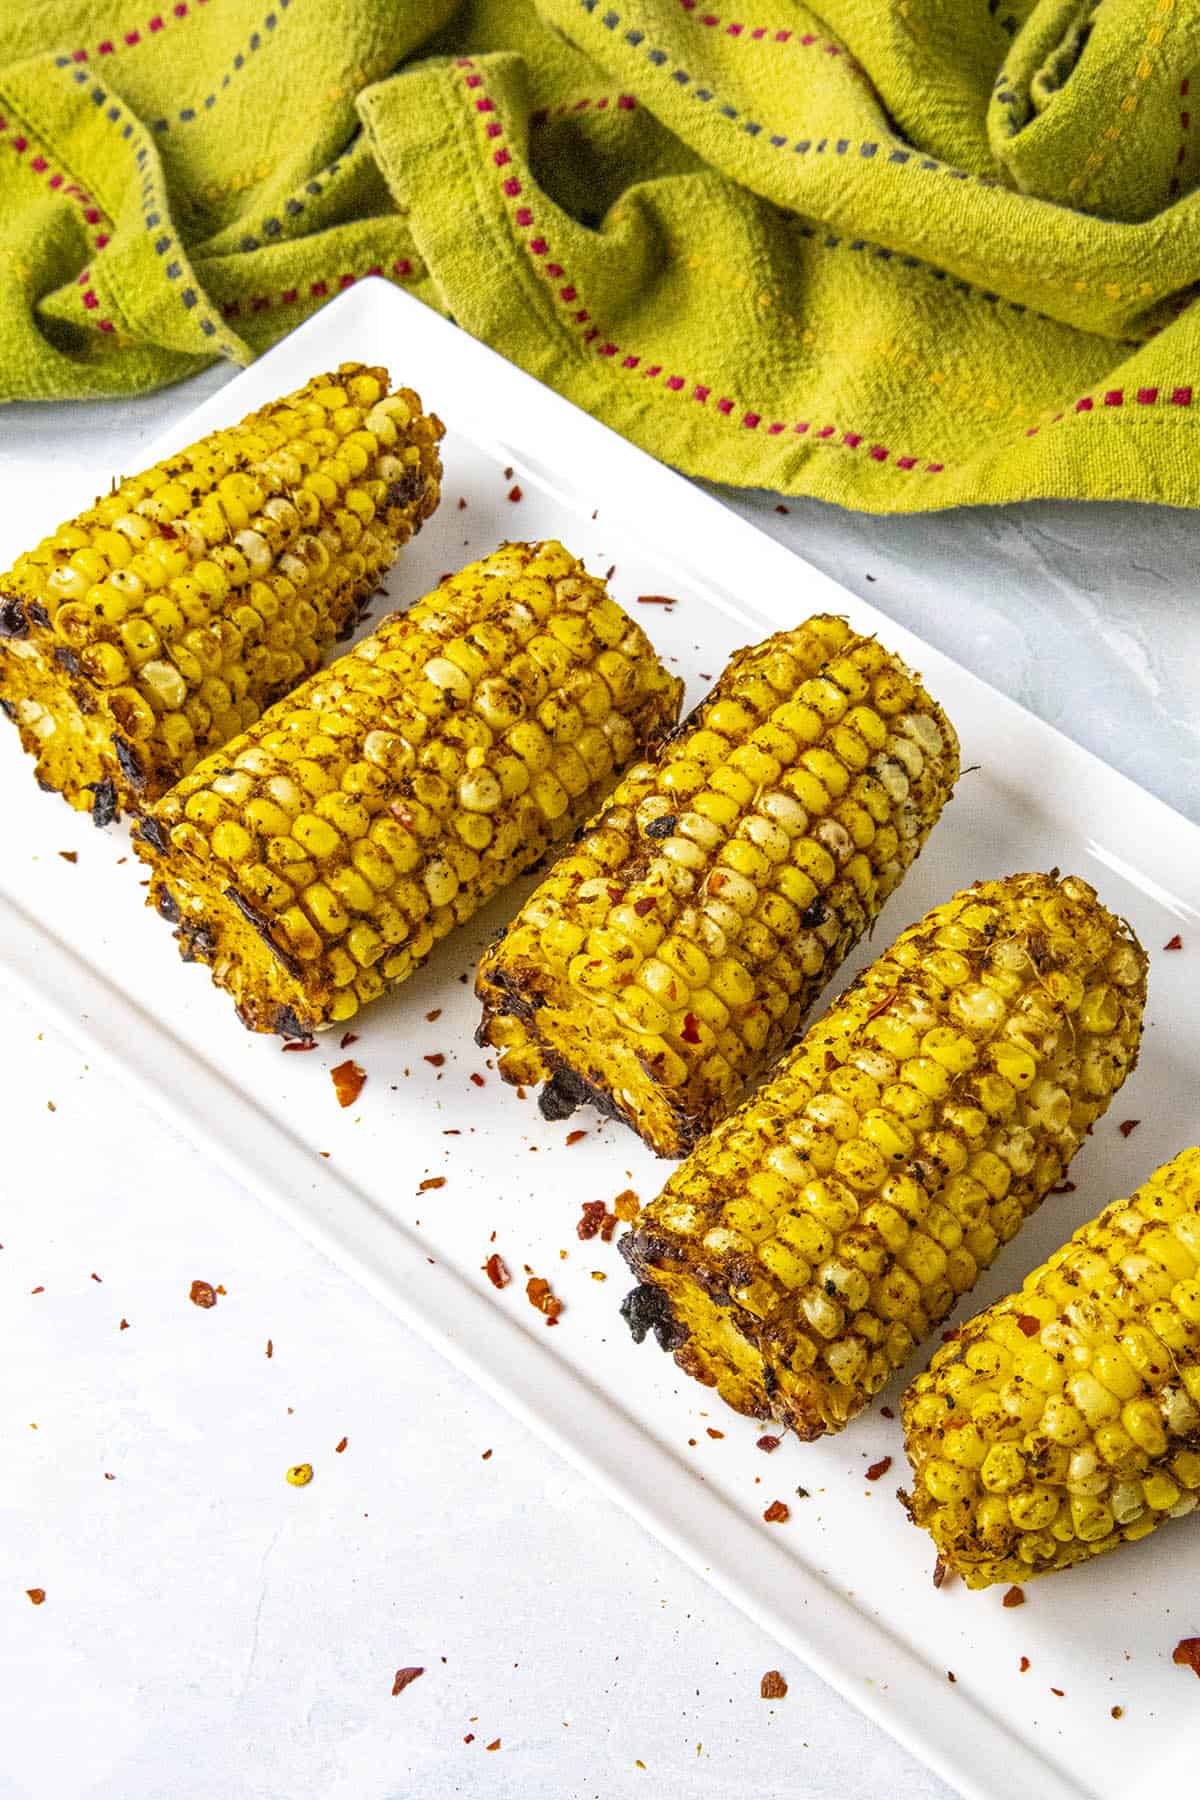 Grilled corn on the cob, ready to serve